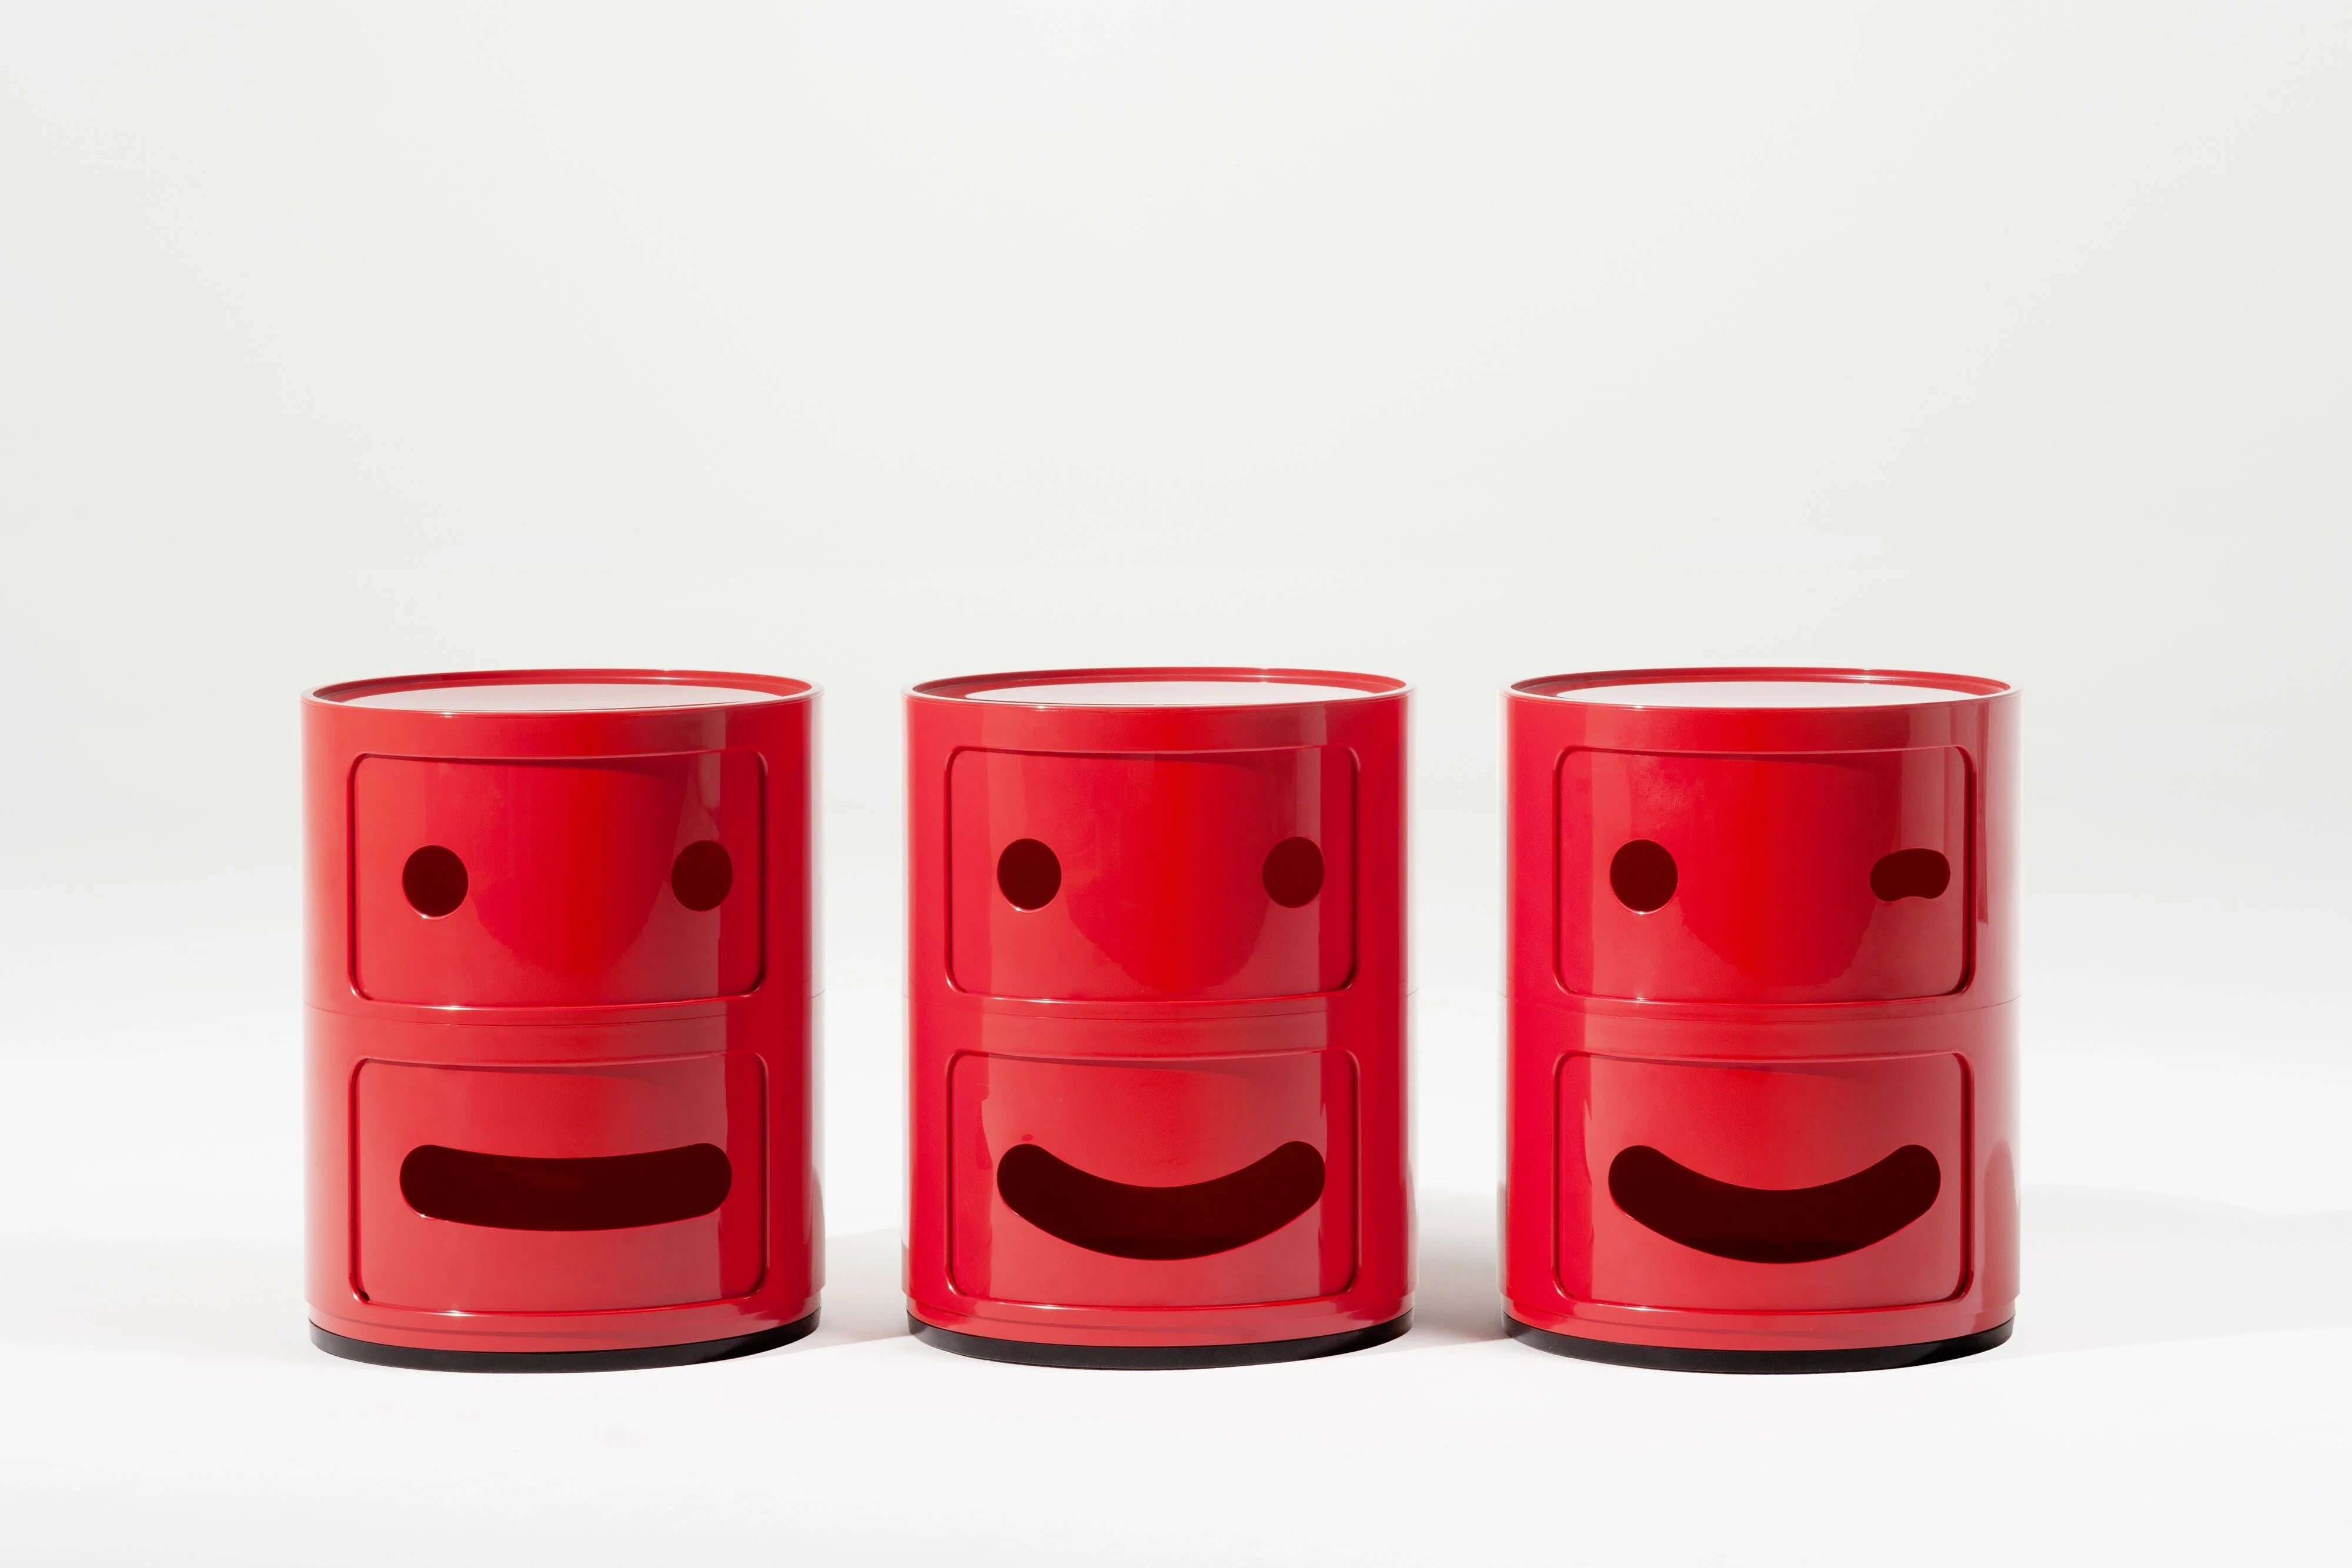 Kartell Componibili Smile Container 2, guiño